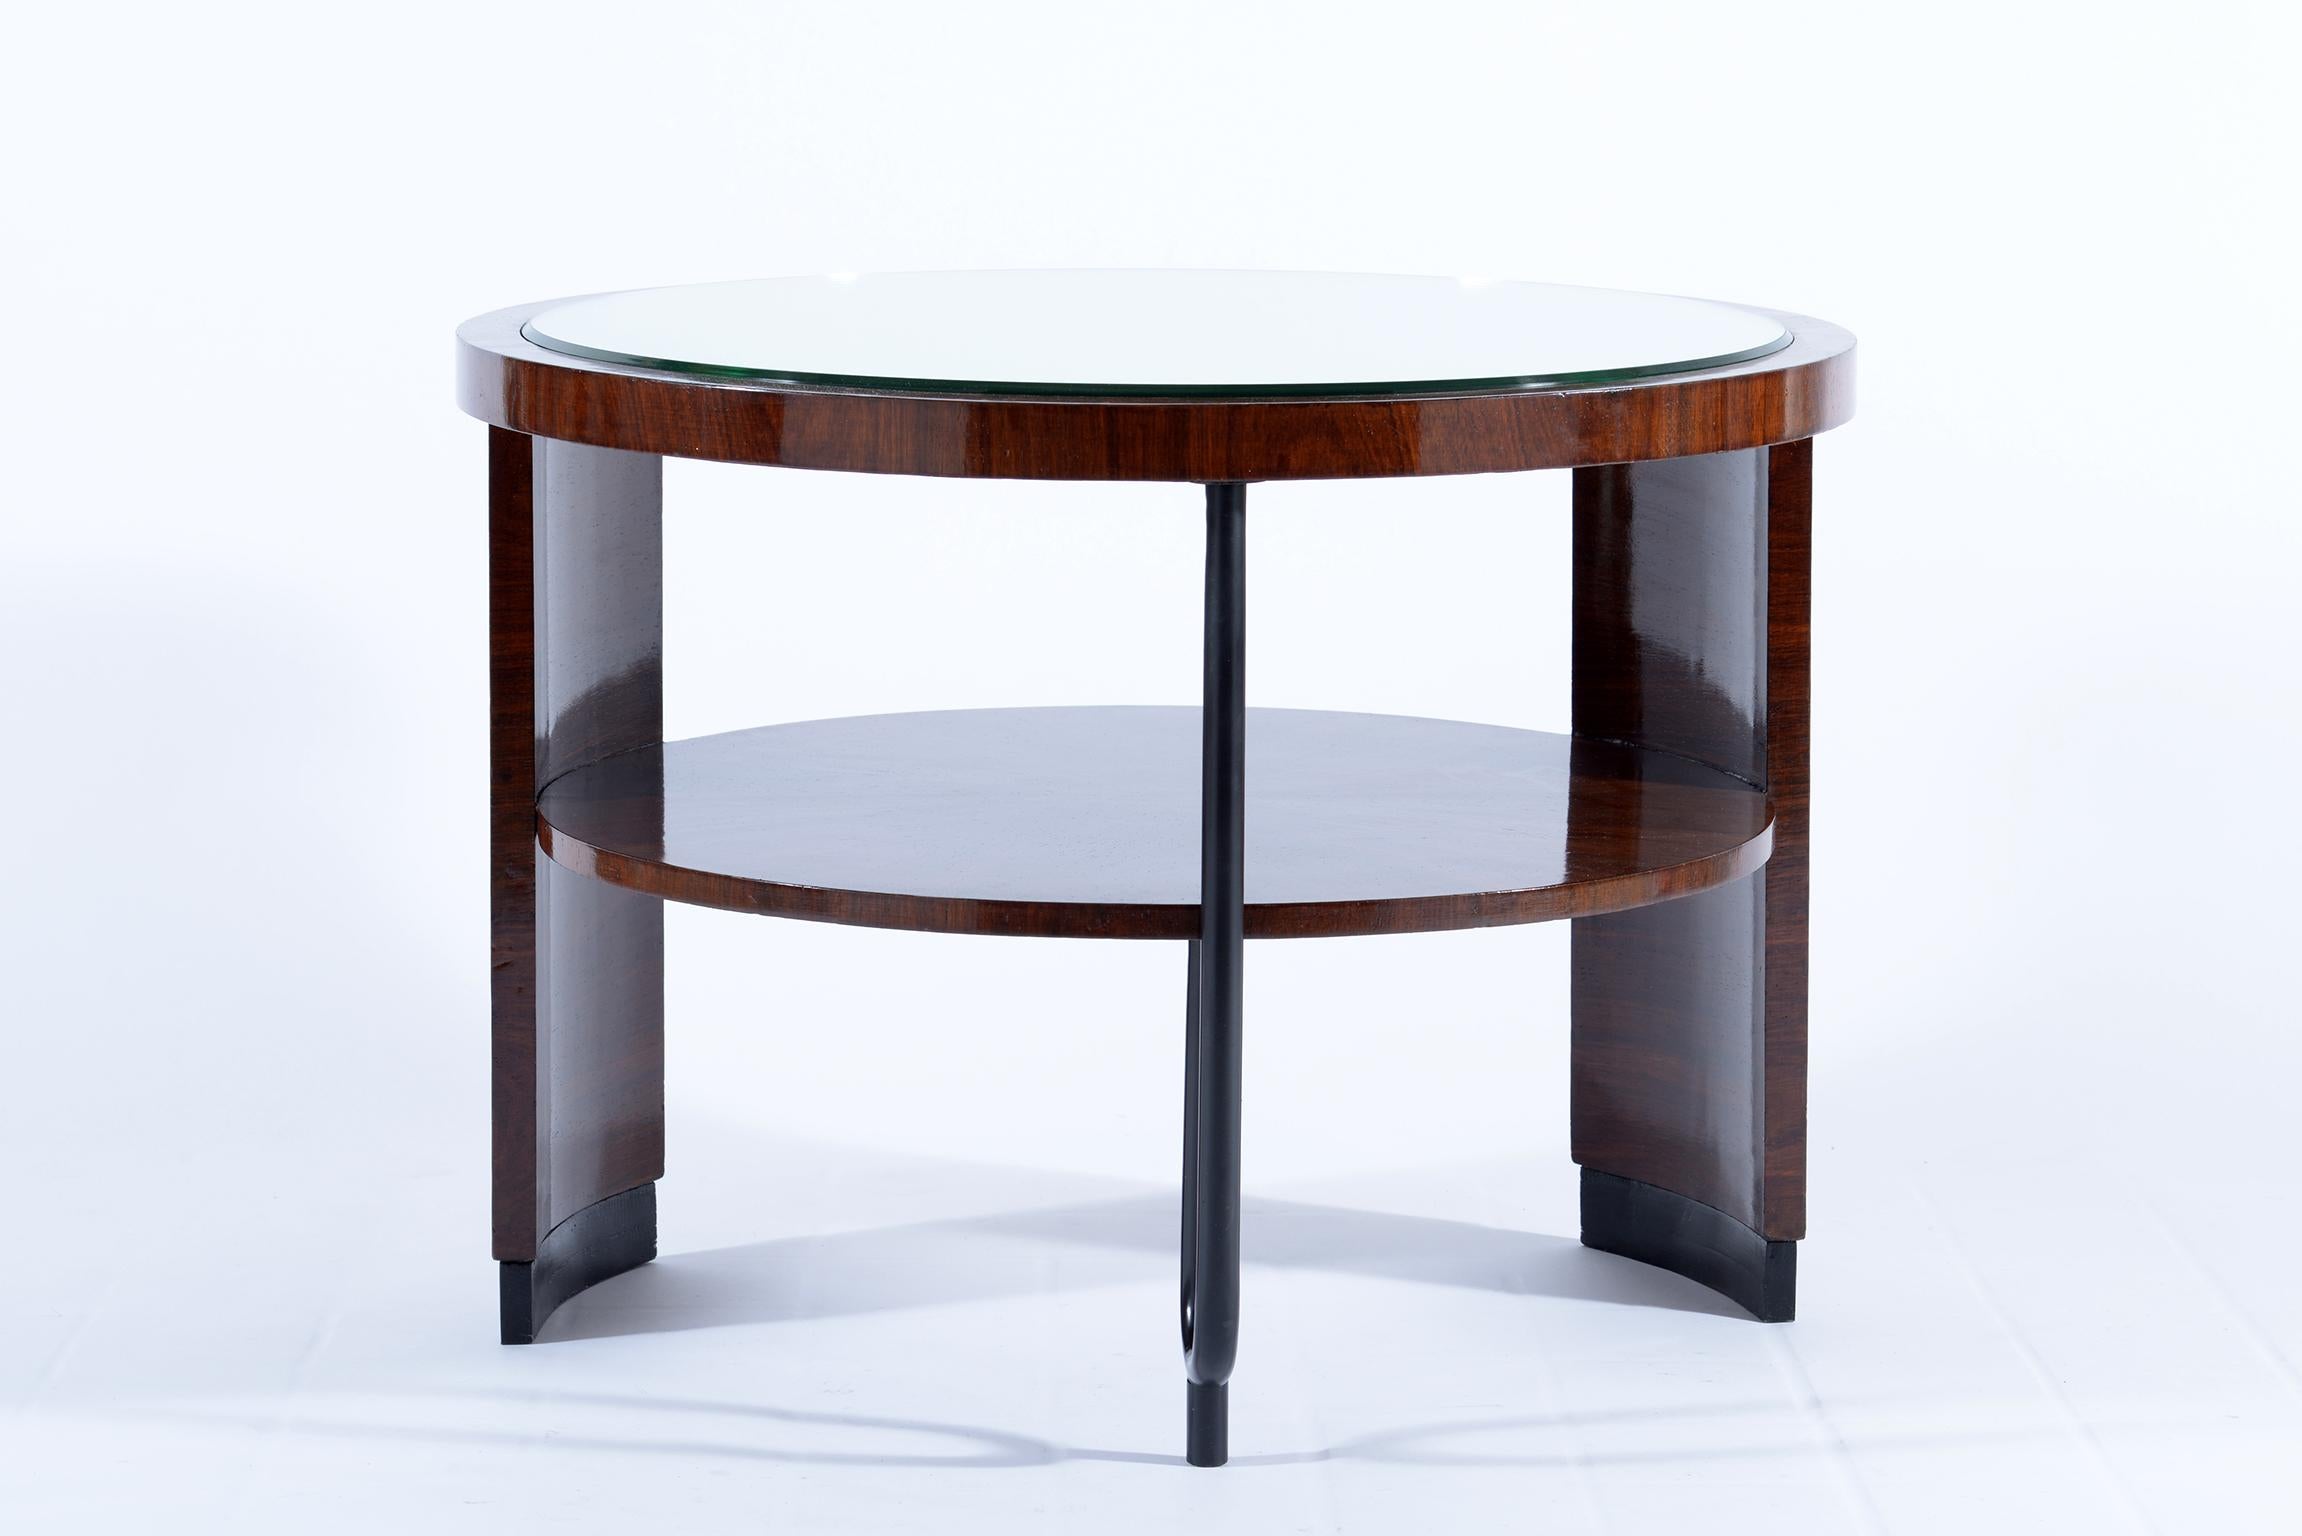 Double shelve round Art Deco Italian side or occasional table in precious wood and feet in black lacquered wood. The top is in mirror and the third leg is in black metal. Produced in the 1930s this table falls into the 